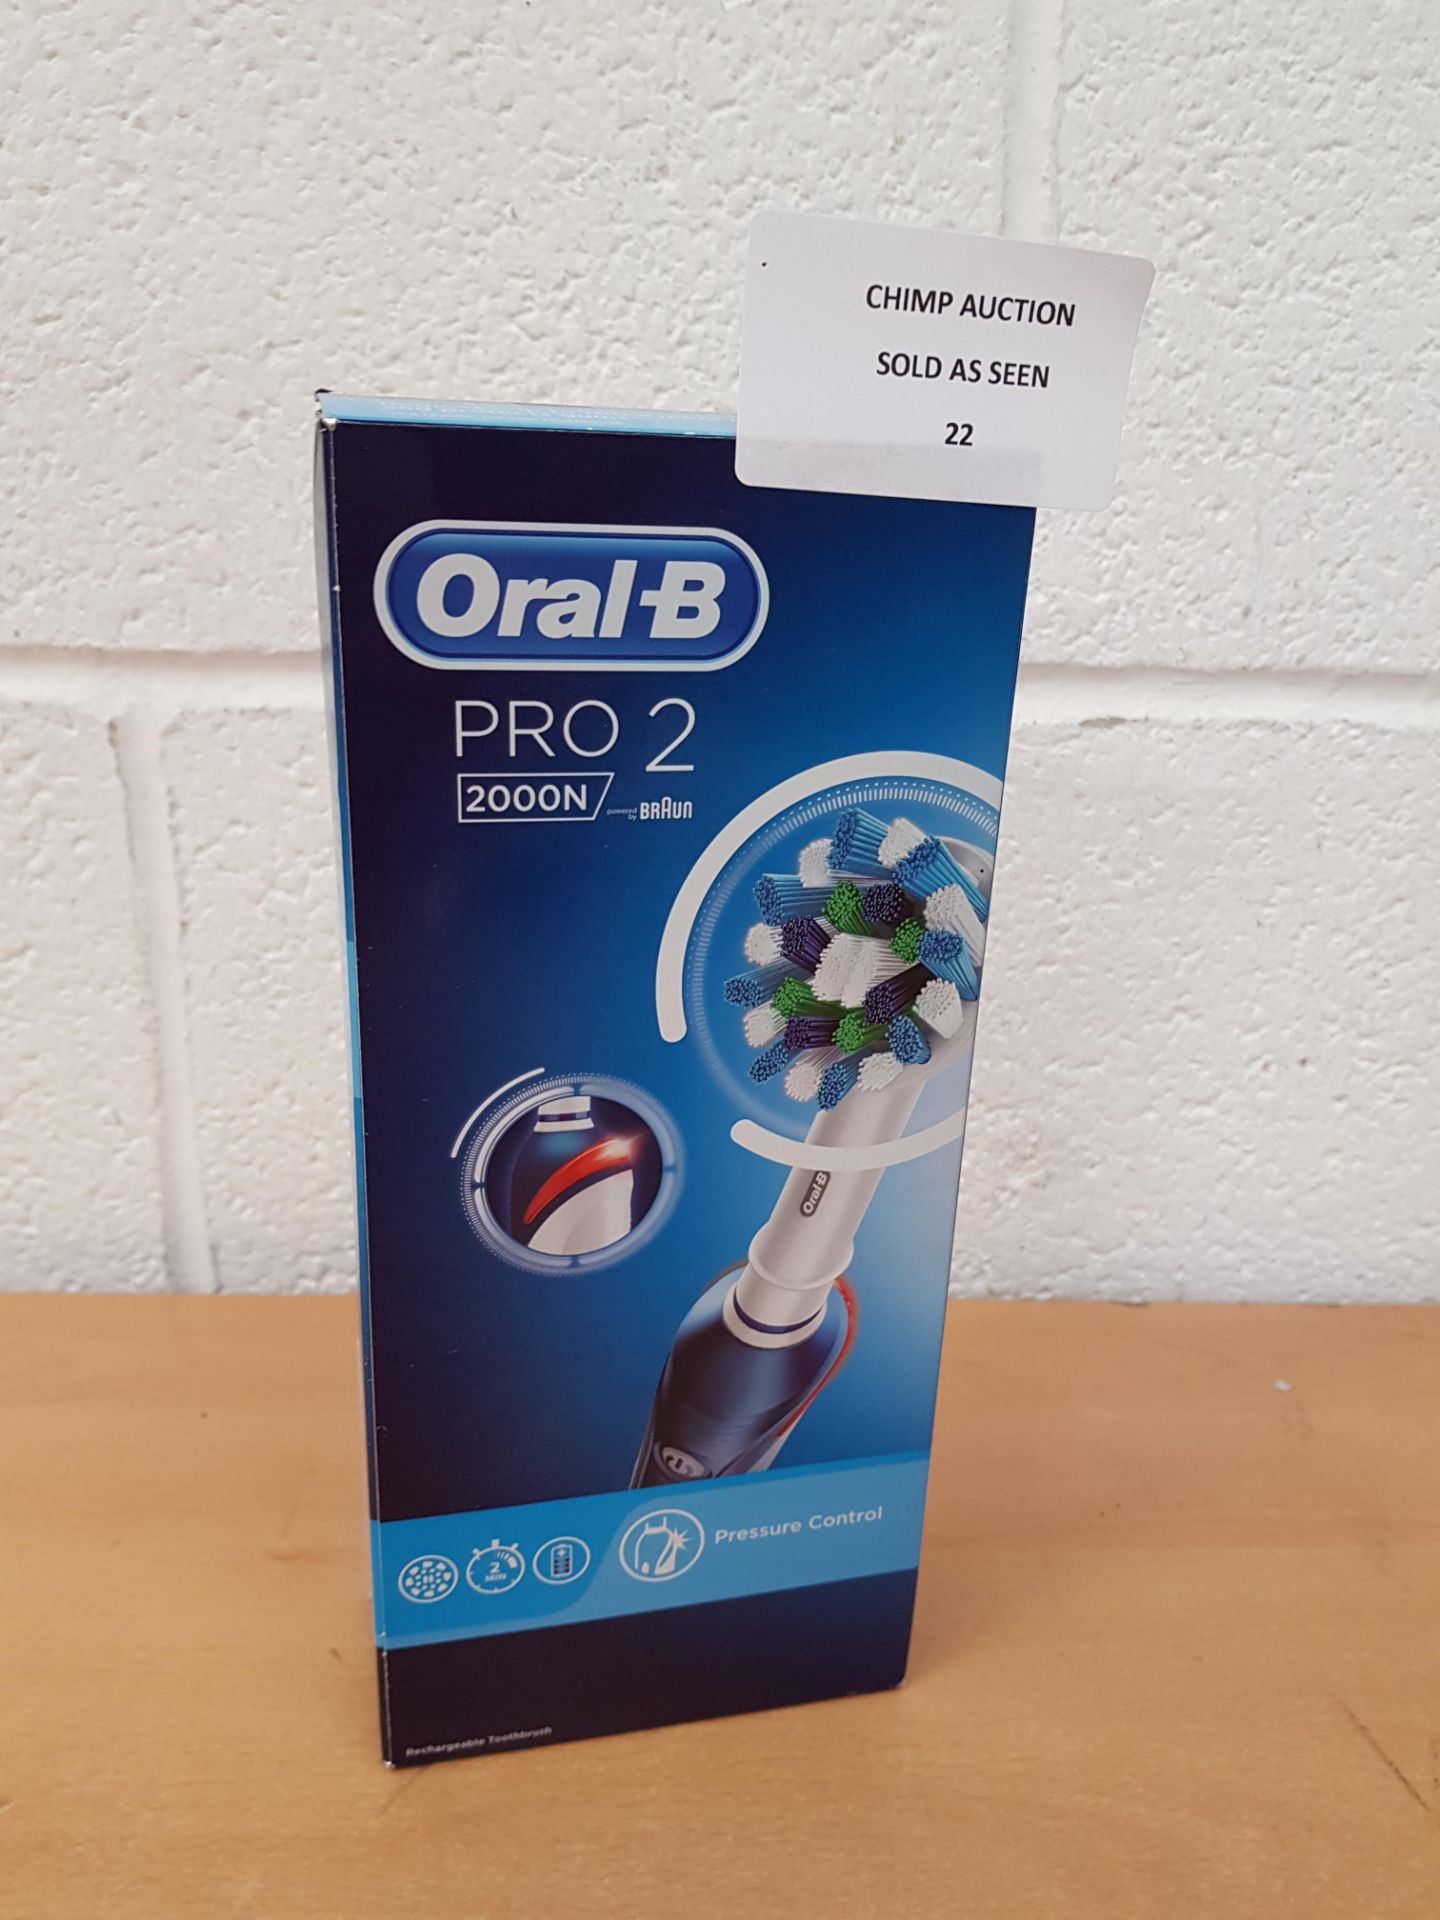 Oral-B Pro 2 2000 electric Toothbrush RRP £79.99.